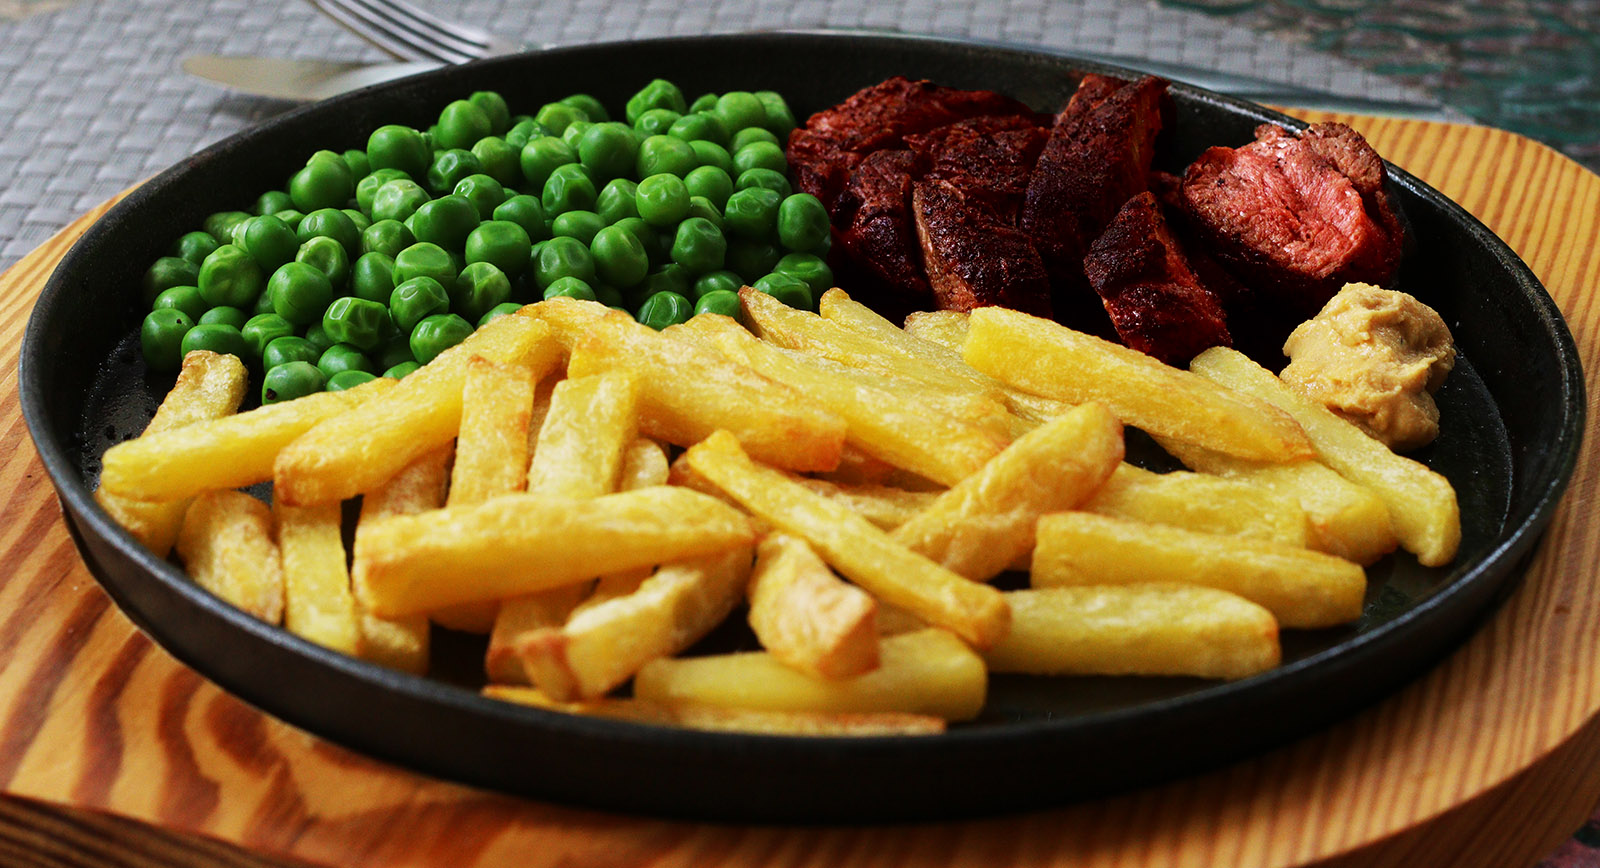 Chips and peas 2 s.jpg